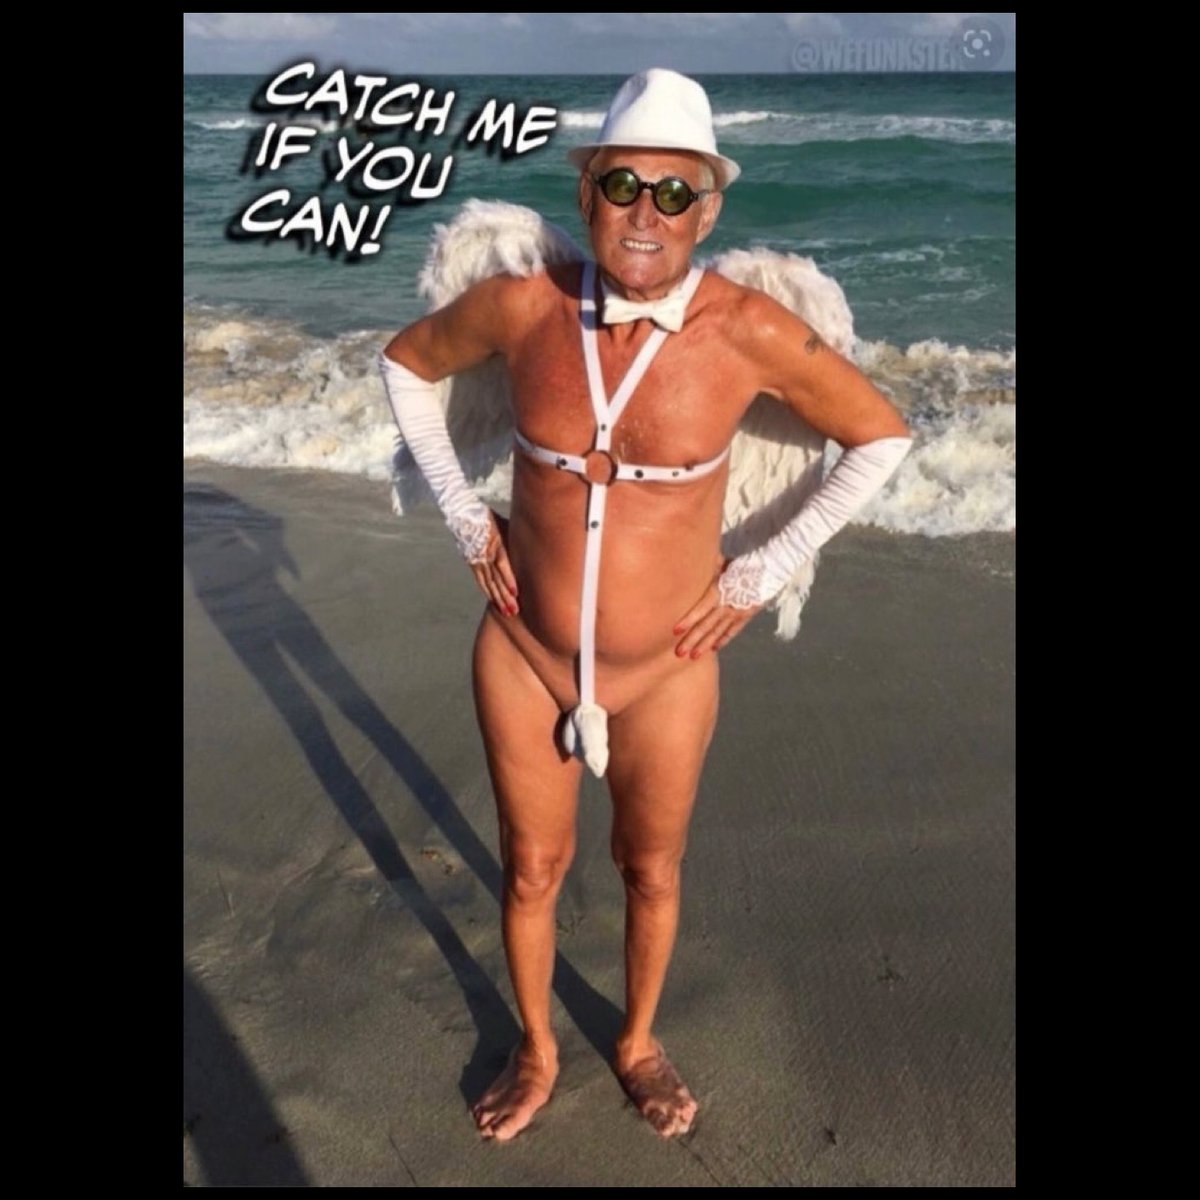 .
#RogerStone made another one of his rare appearances on this beach this afternoon, shouting 'Catch Me If You Can!'